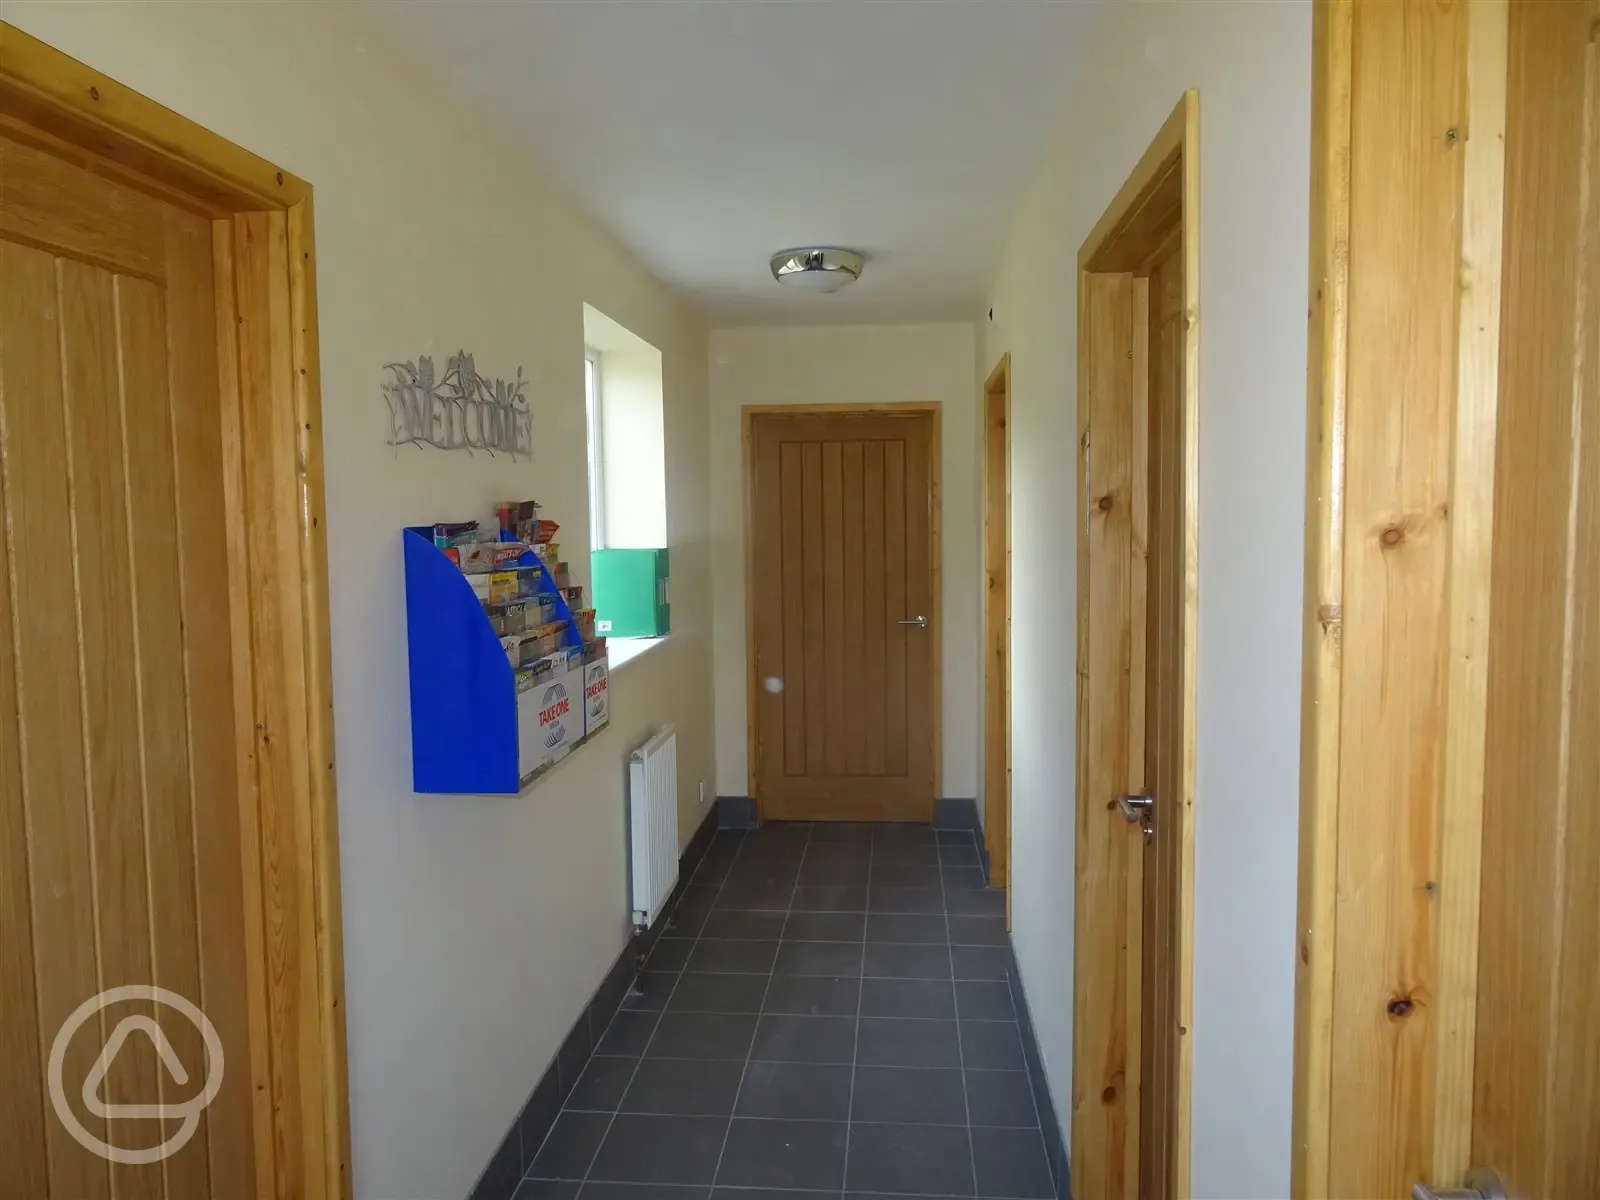 Entrance Hall to Showers and Toilets